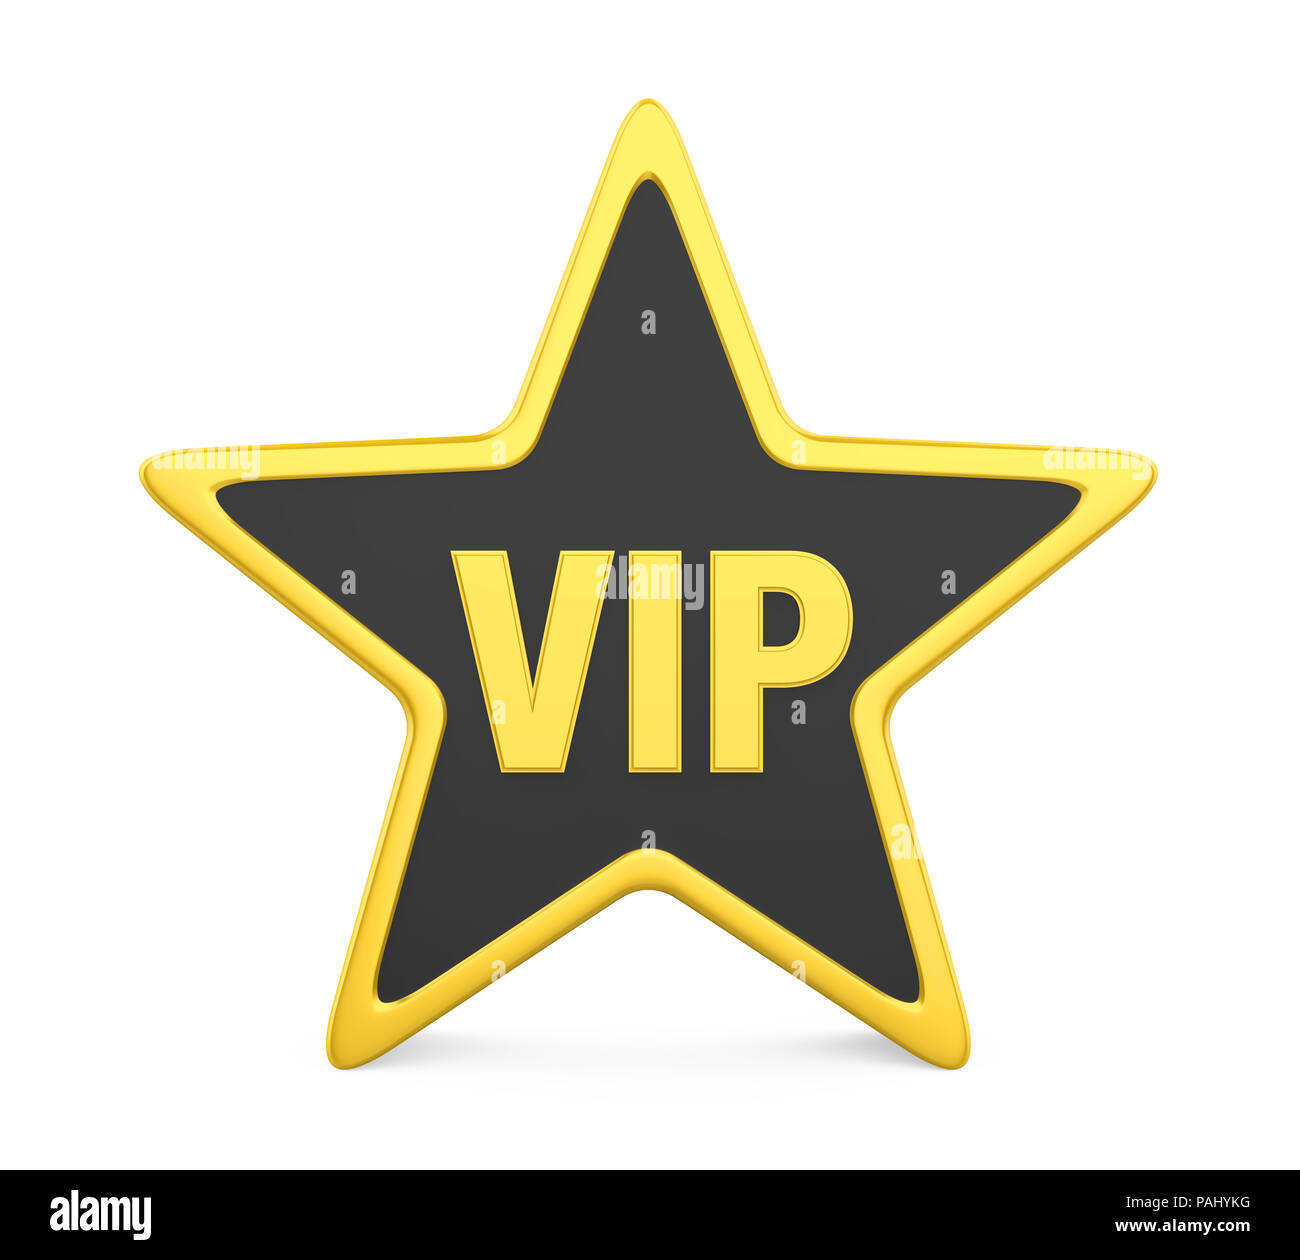 Star Cutouts Cut Out of VIP Sign 